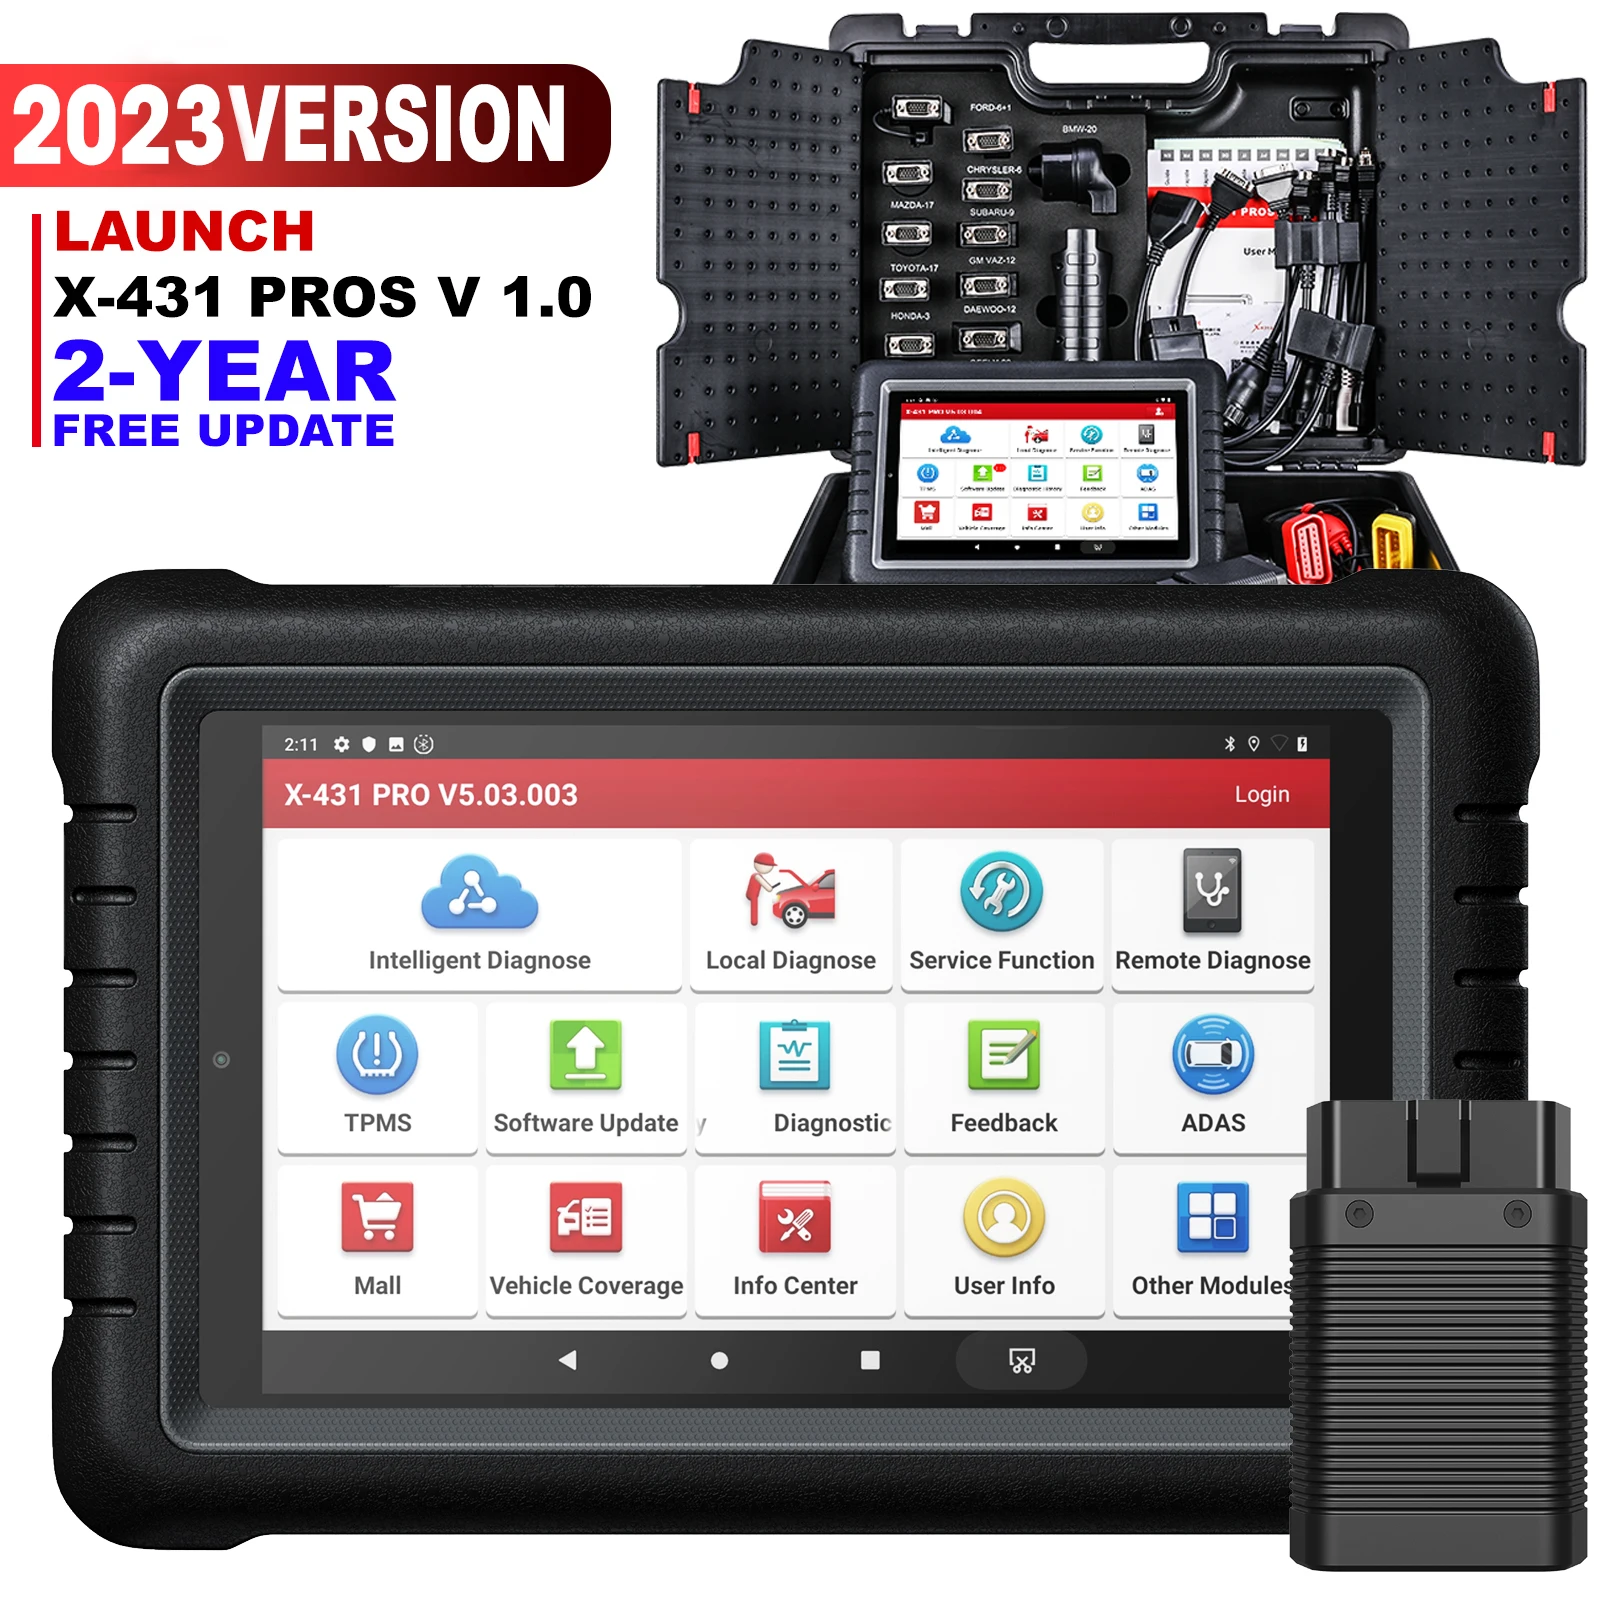 

Universal launch x431 prosv pros v1.0 x-431 bi-directional vehicle readers scan tools code abs bleeding diagnostic car scanners